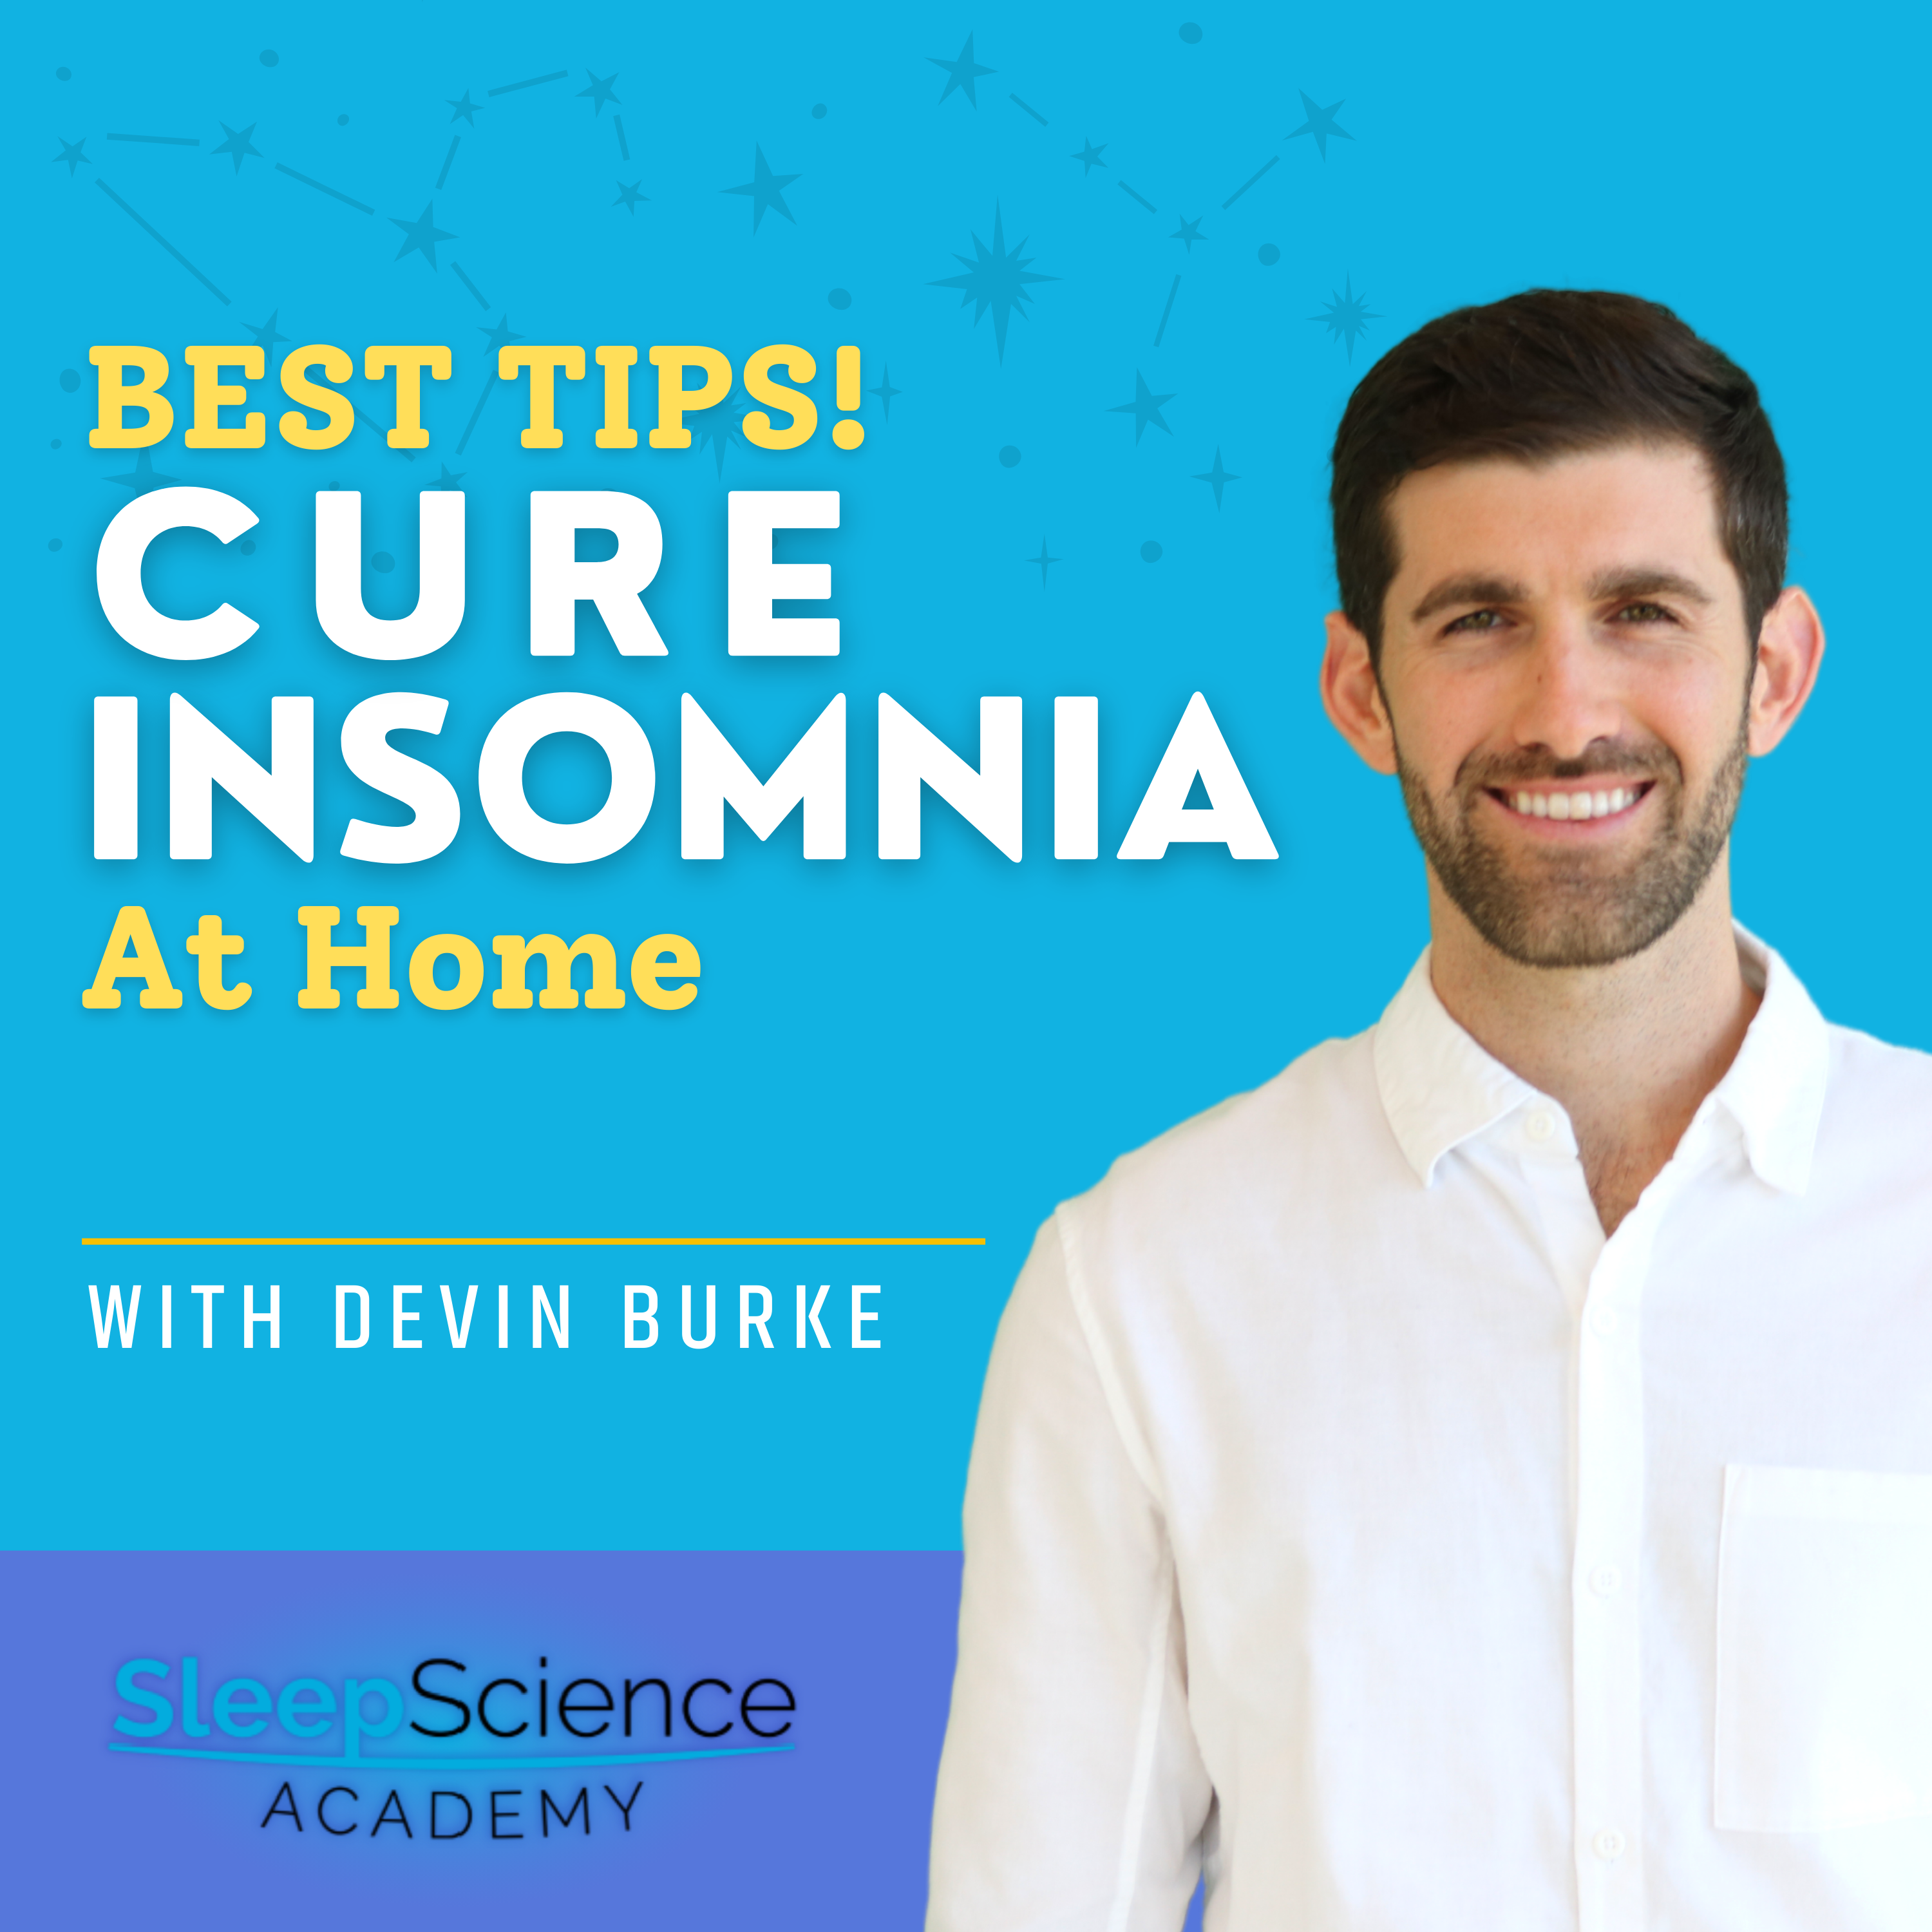 How to Solve Insomnia at Home? (BEST TIPS)